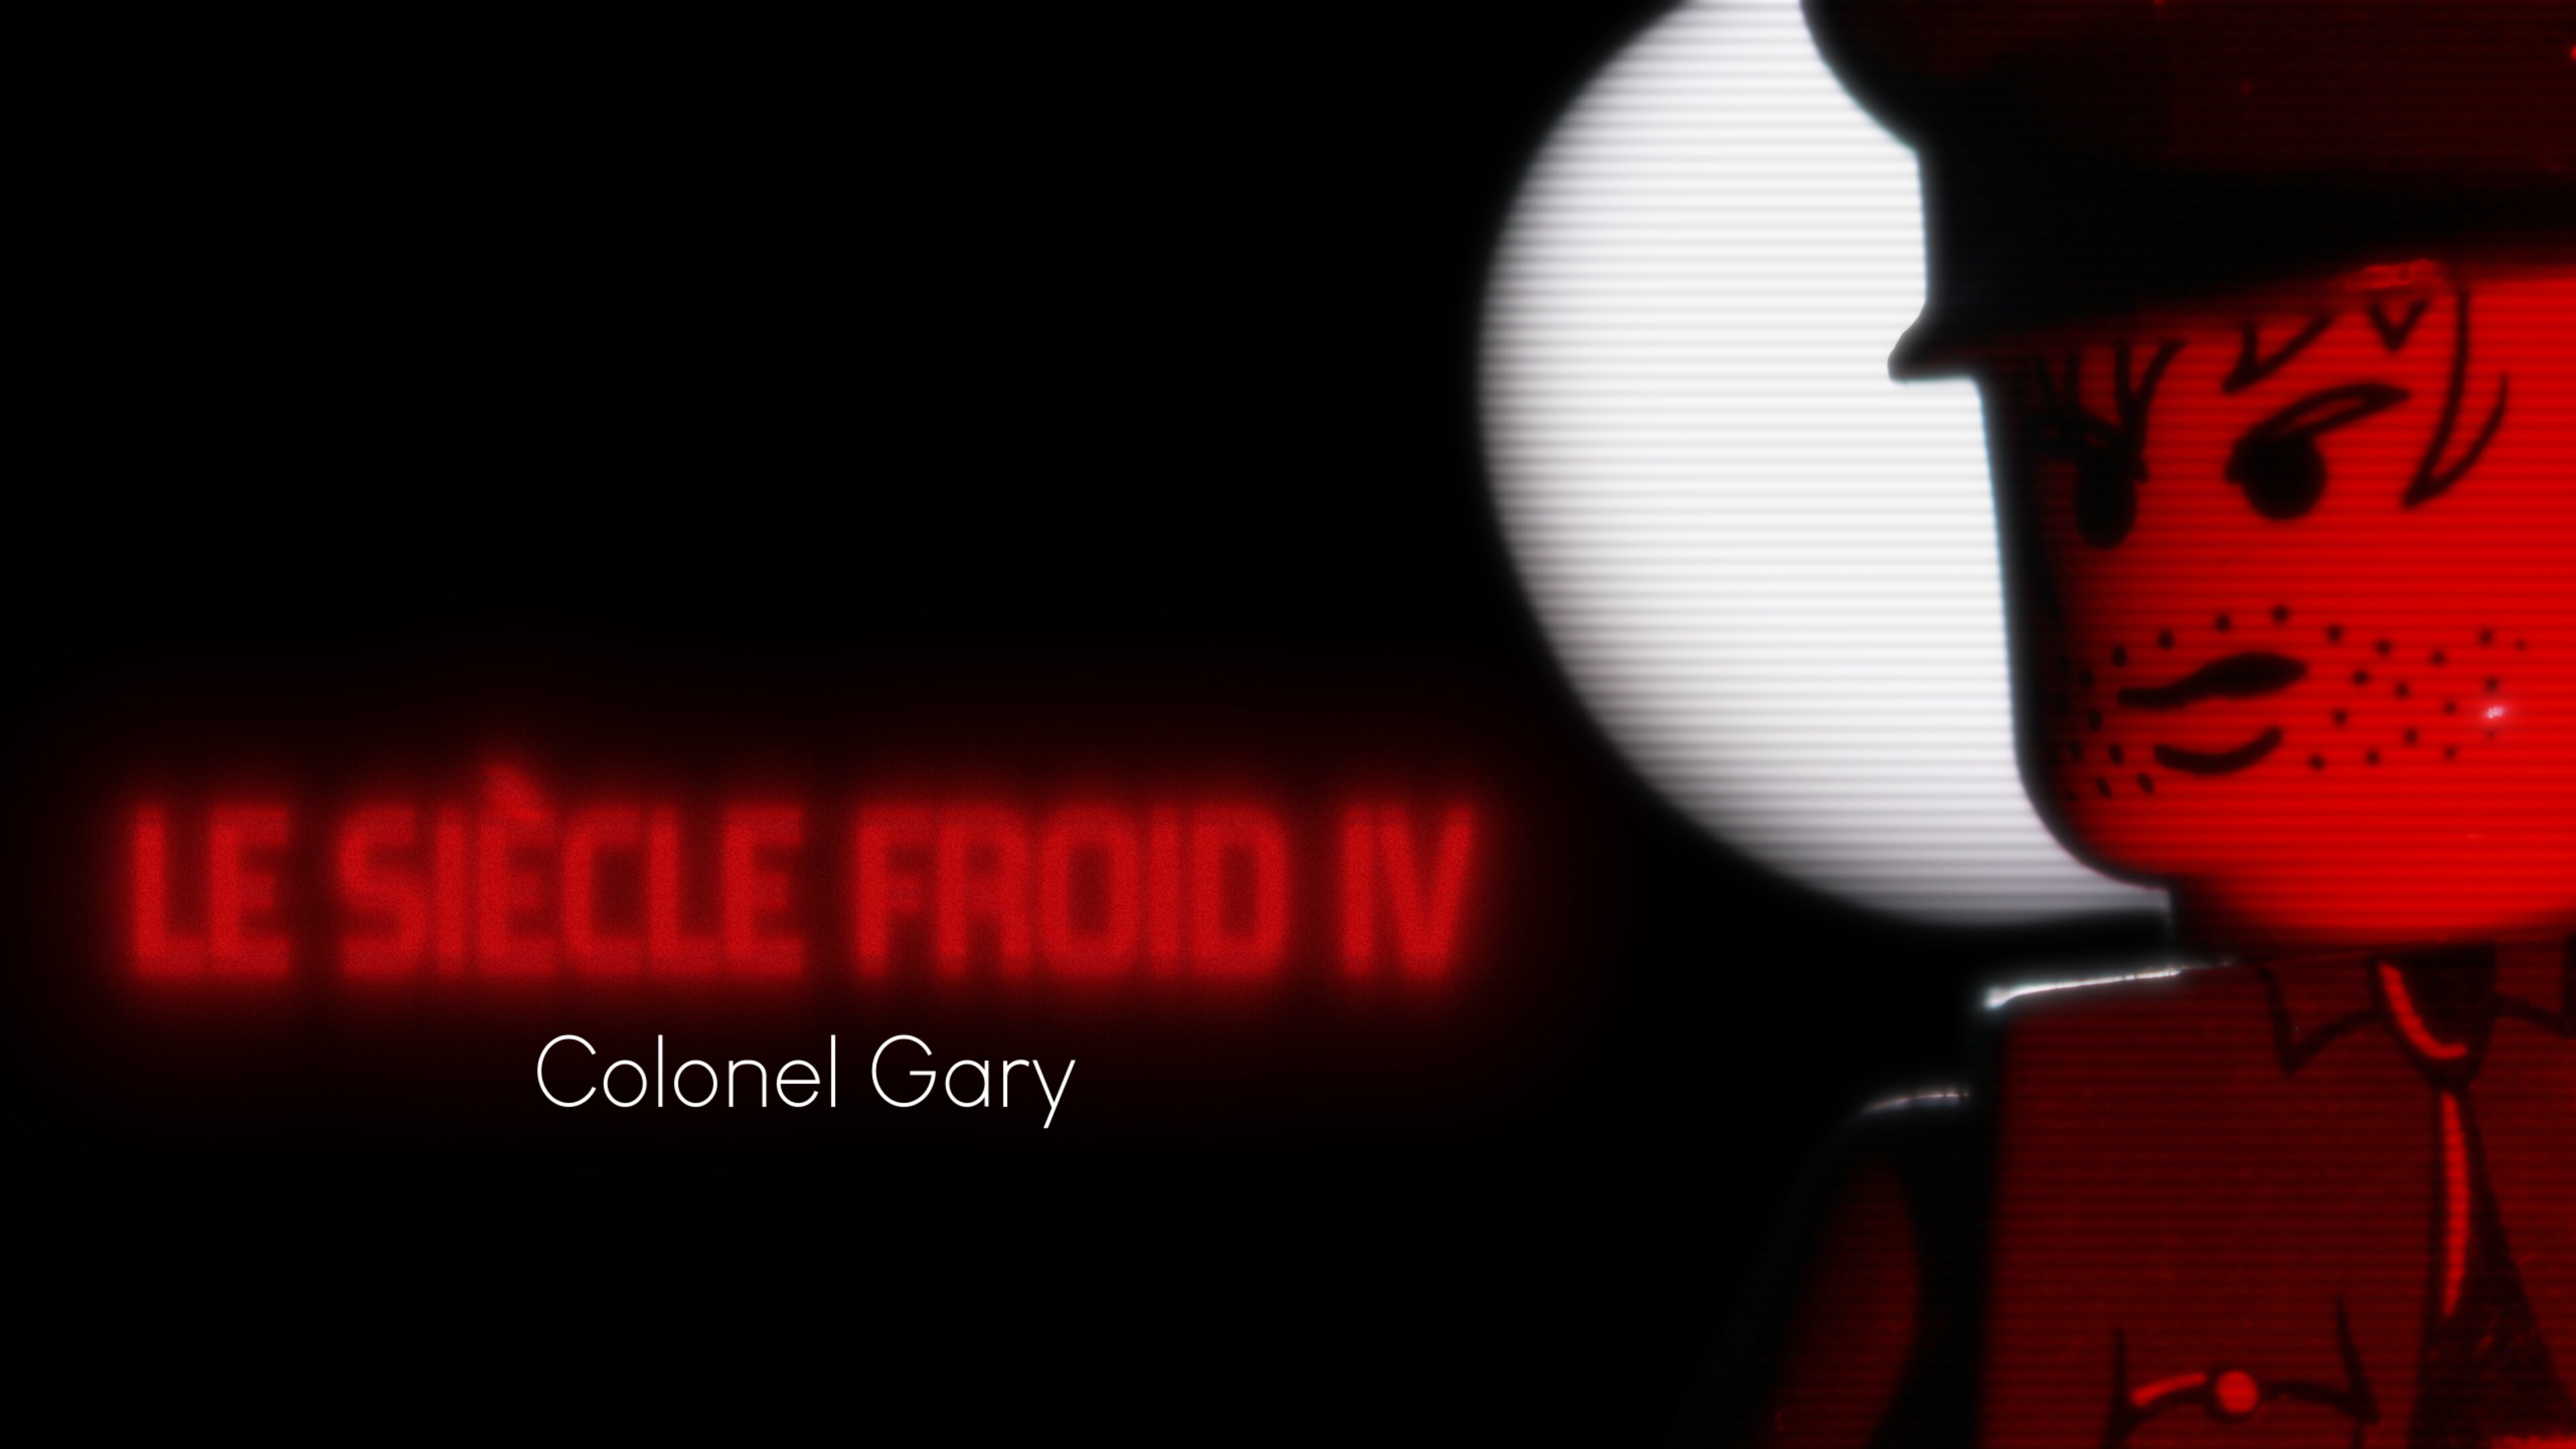 Le Siècle Froid 4 - Colonel Gary